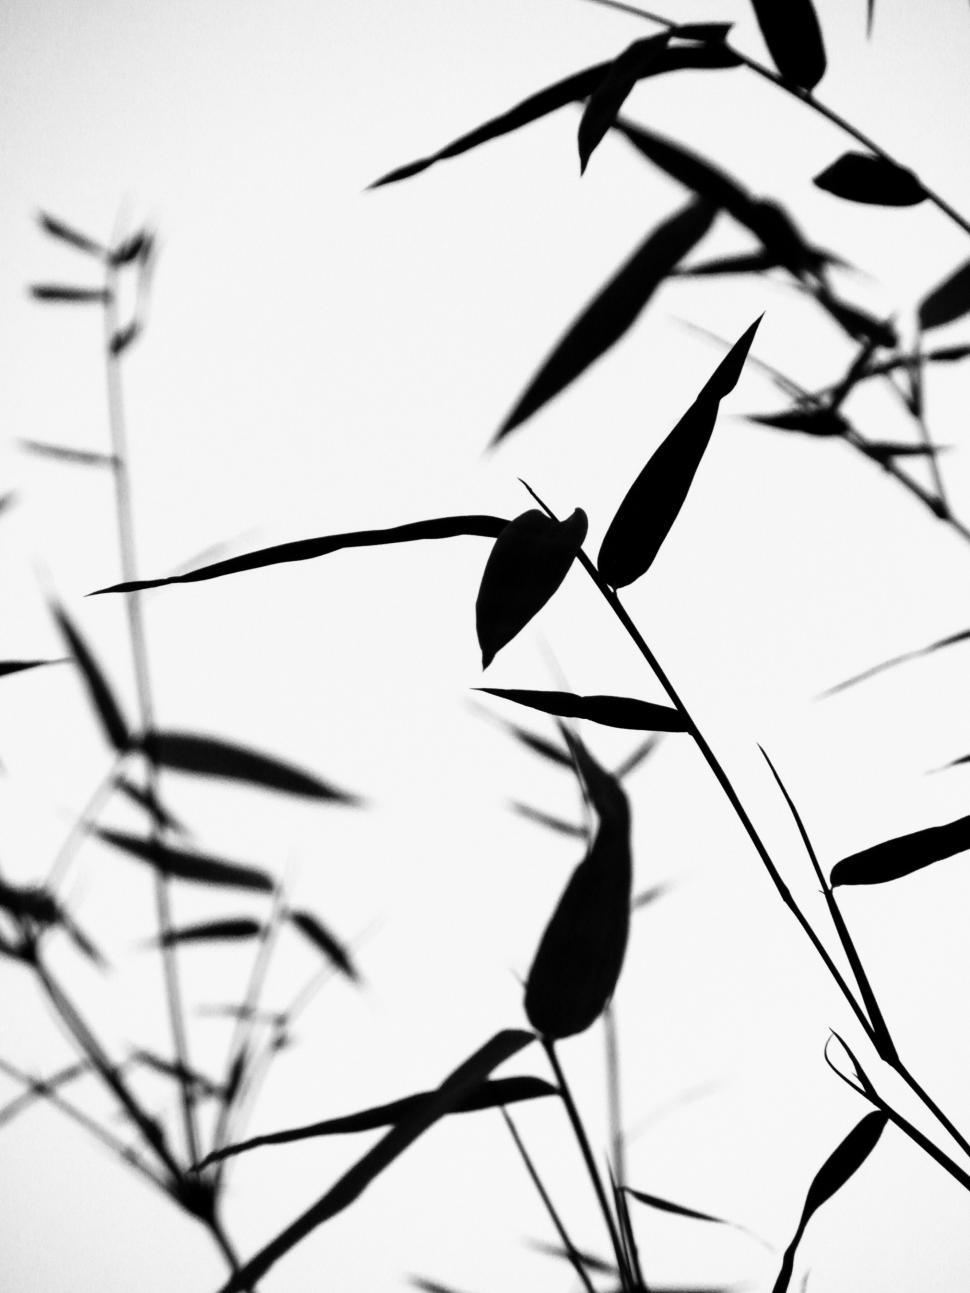 Free Image of Bamboo Leaves Silhouette 